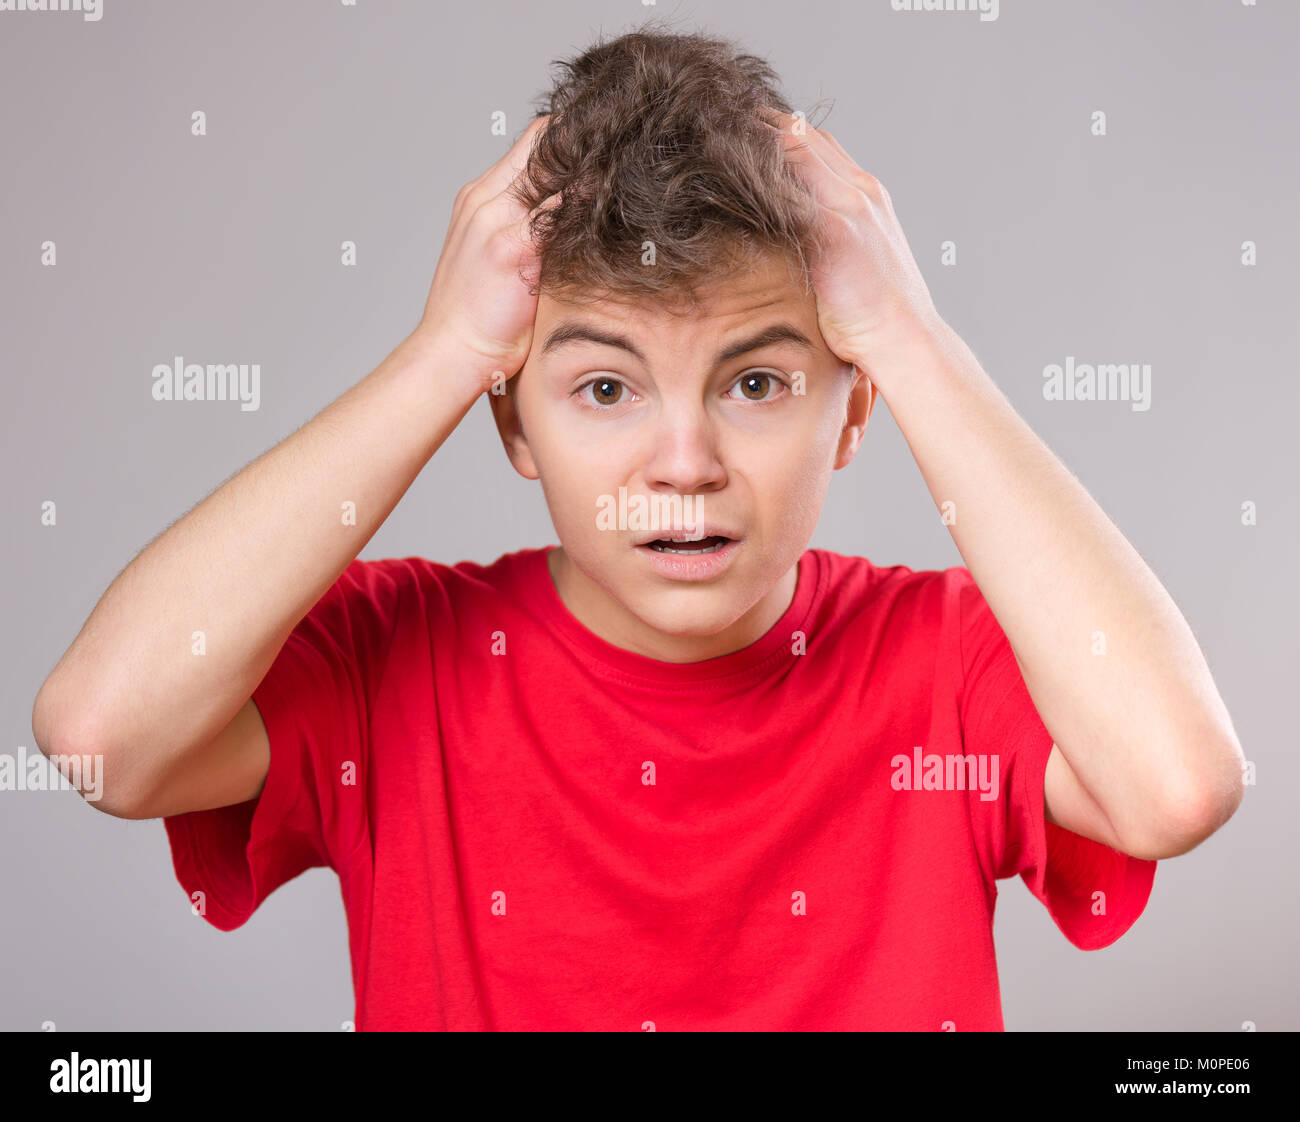 Emotional portrait of excited teen boy. Funny cute surprised child 14 year old with mouth open in amazement. Shocked teenager with hands on head, on g Stock Photo